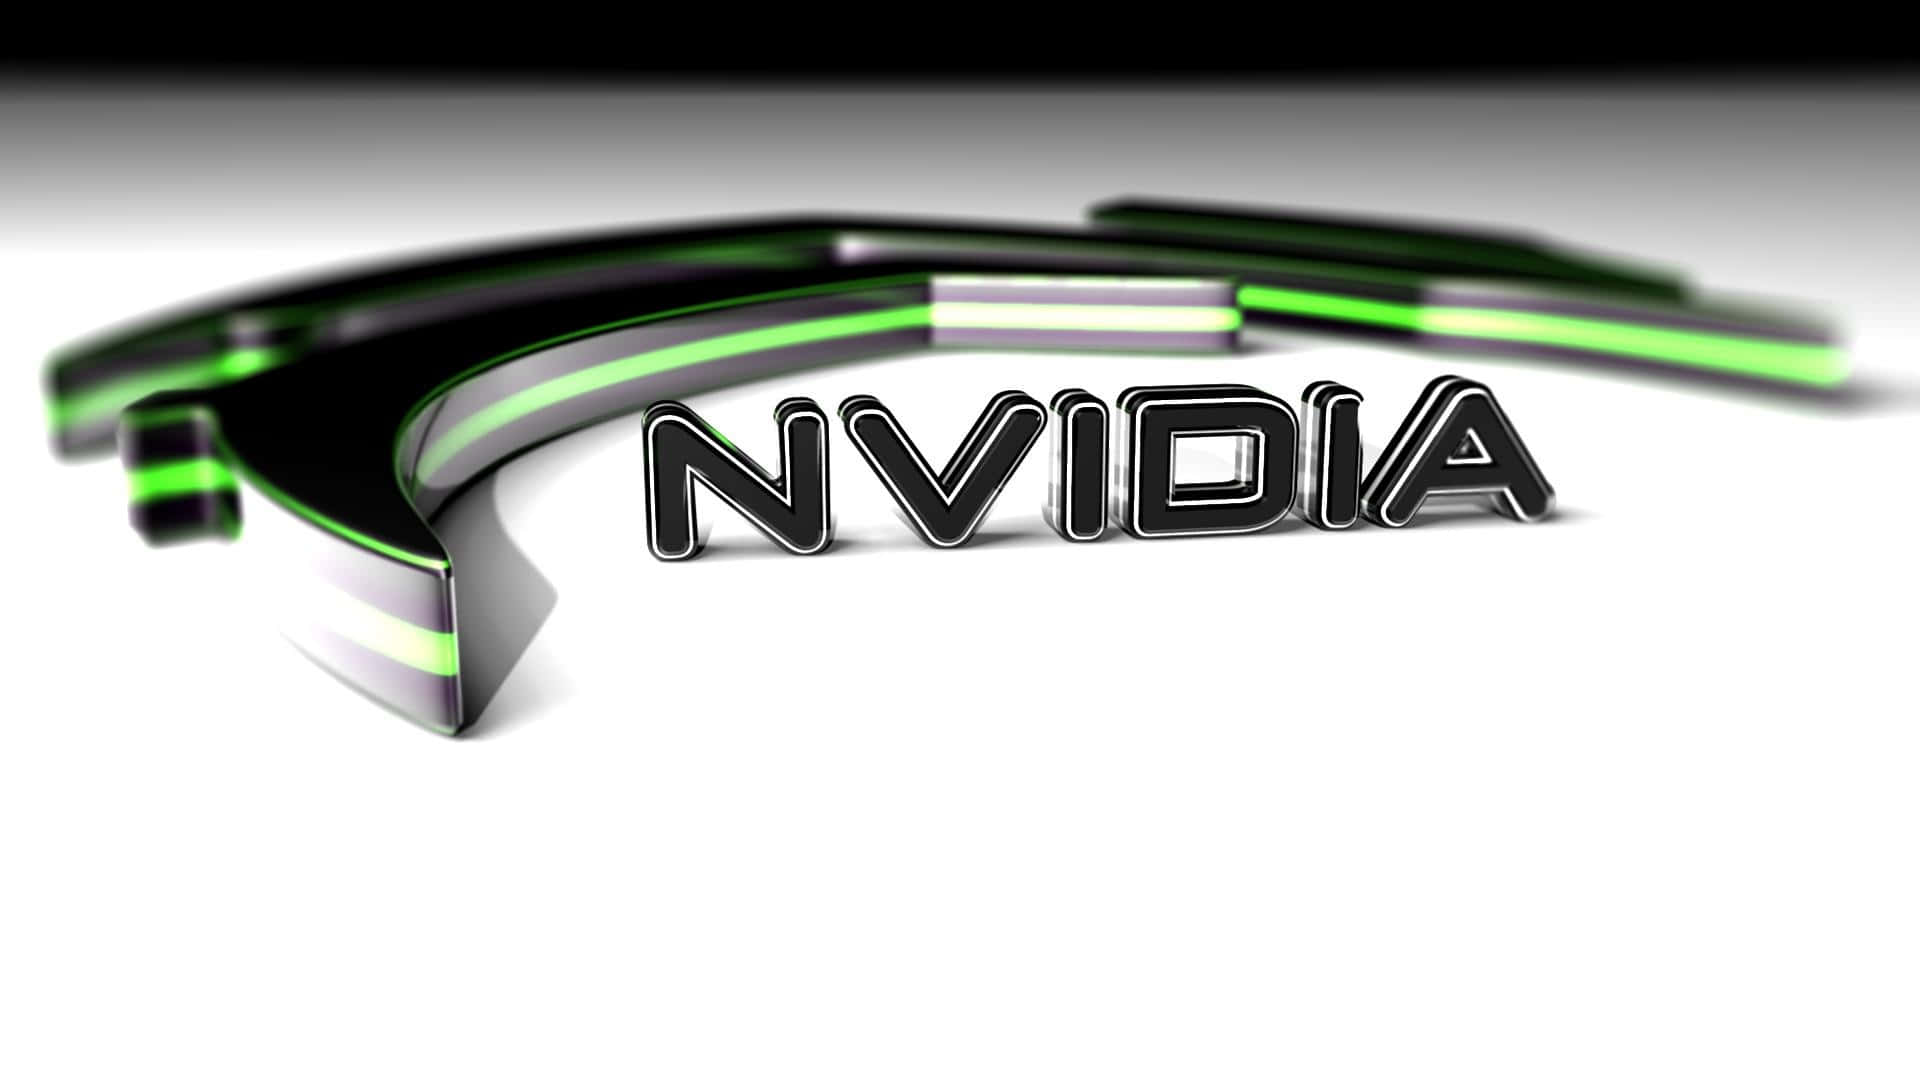 A High-Performance Graphics Card from NVIDIA